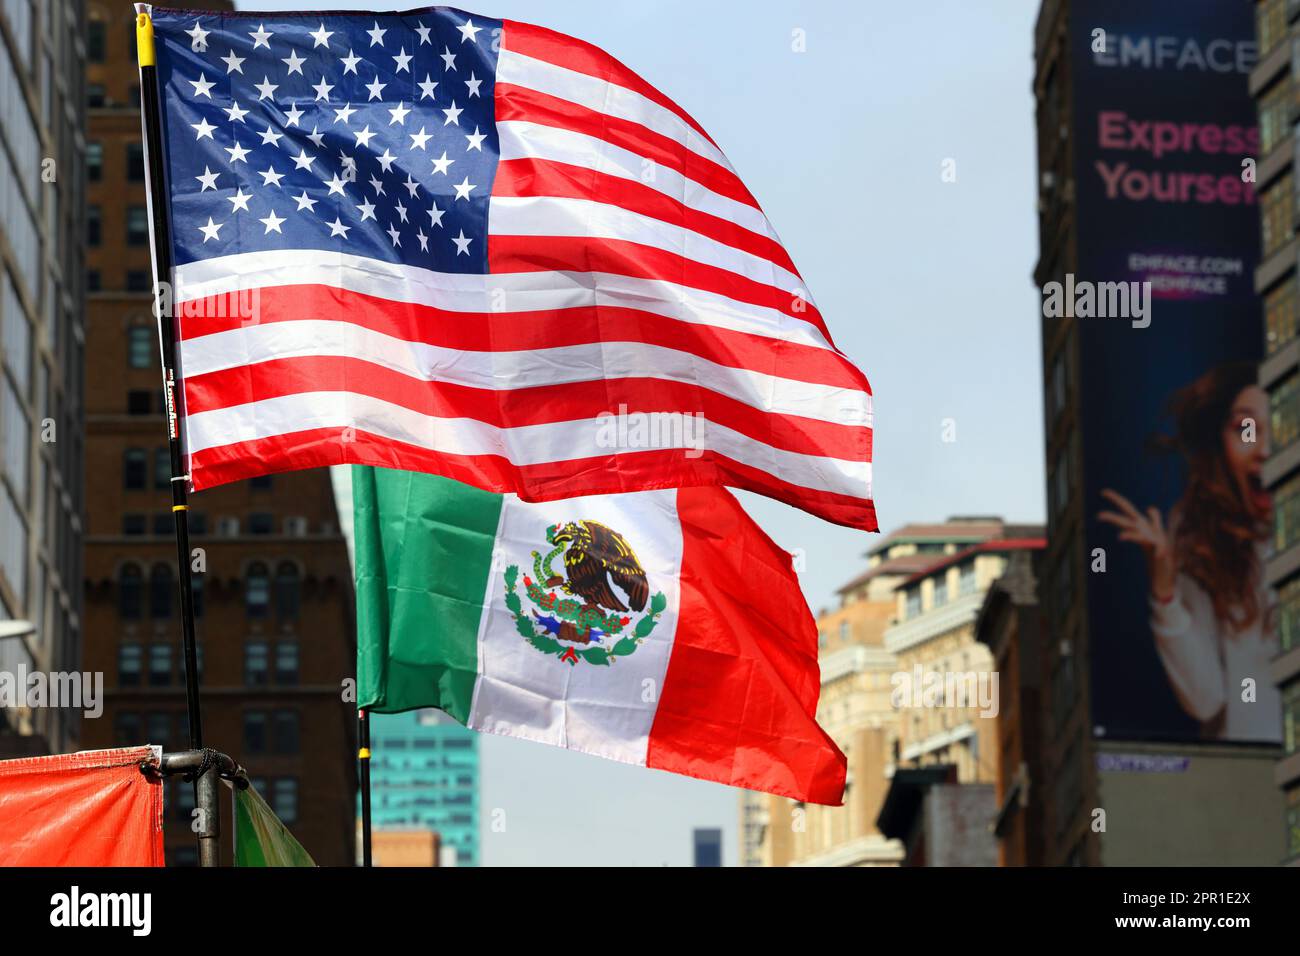 The American flag and the Mexican flag together. Stock Photo